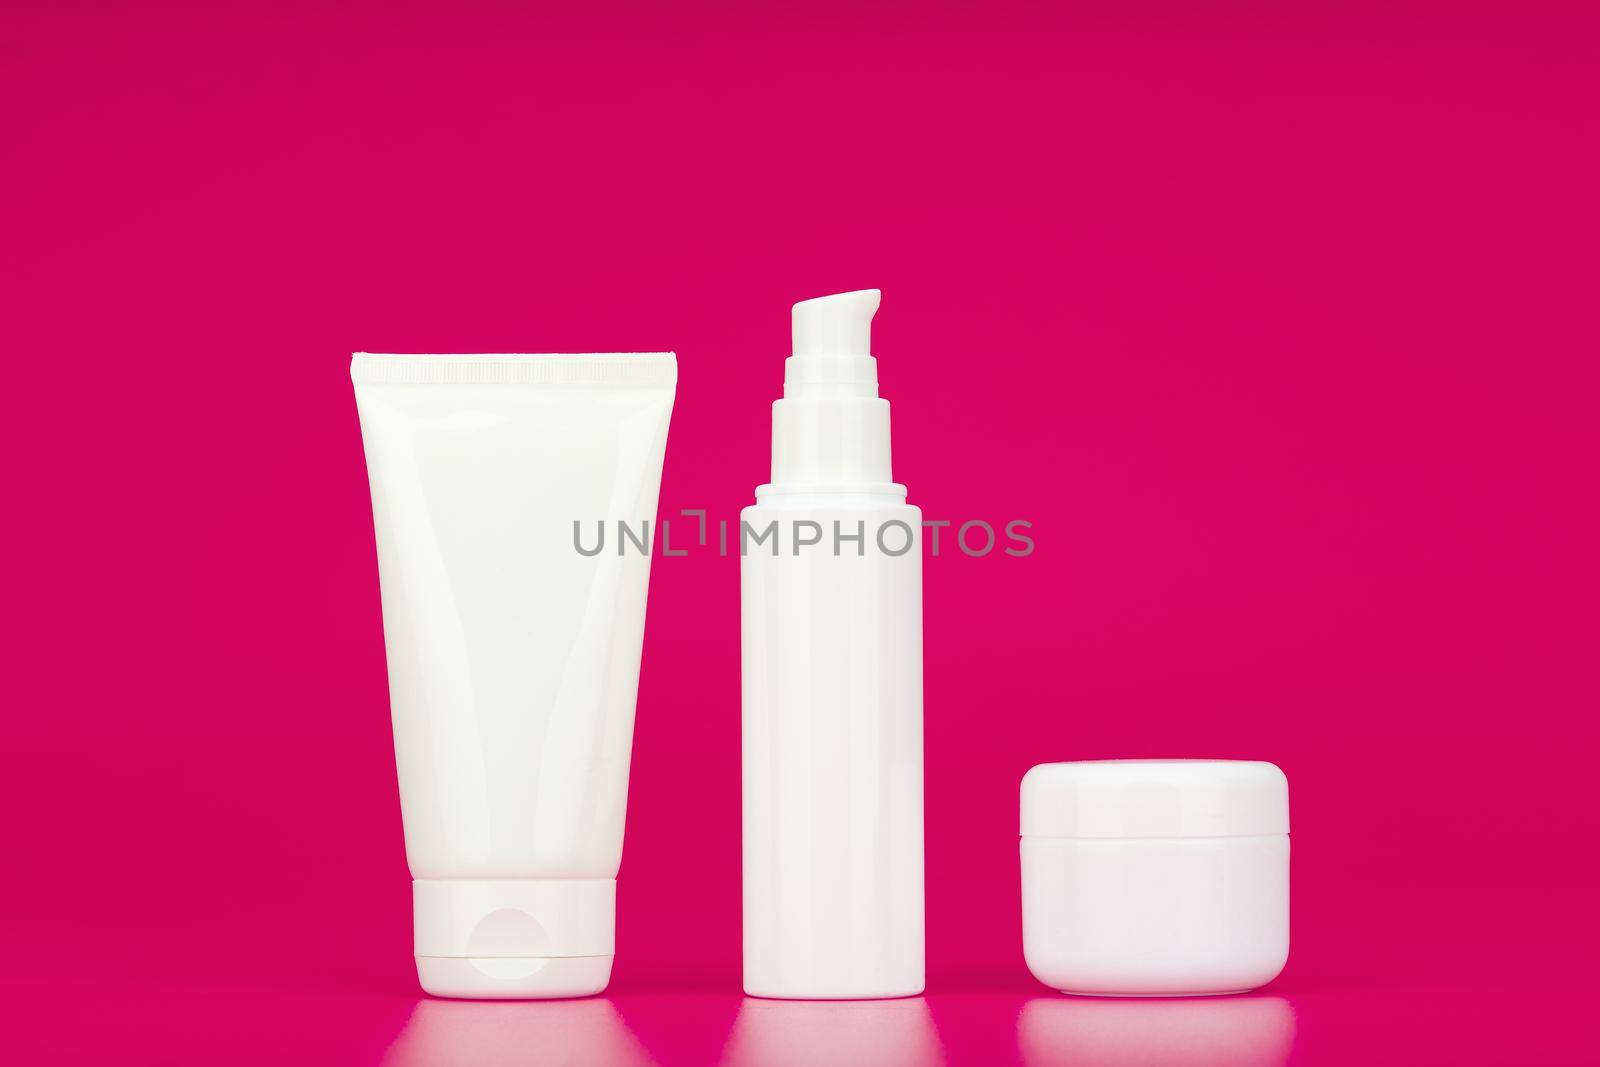 Minimalistic still life with set of cleansing gel, face cream and under eye cream against pink background. Concept of set for daily skin care or anti aging beauty routine